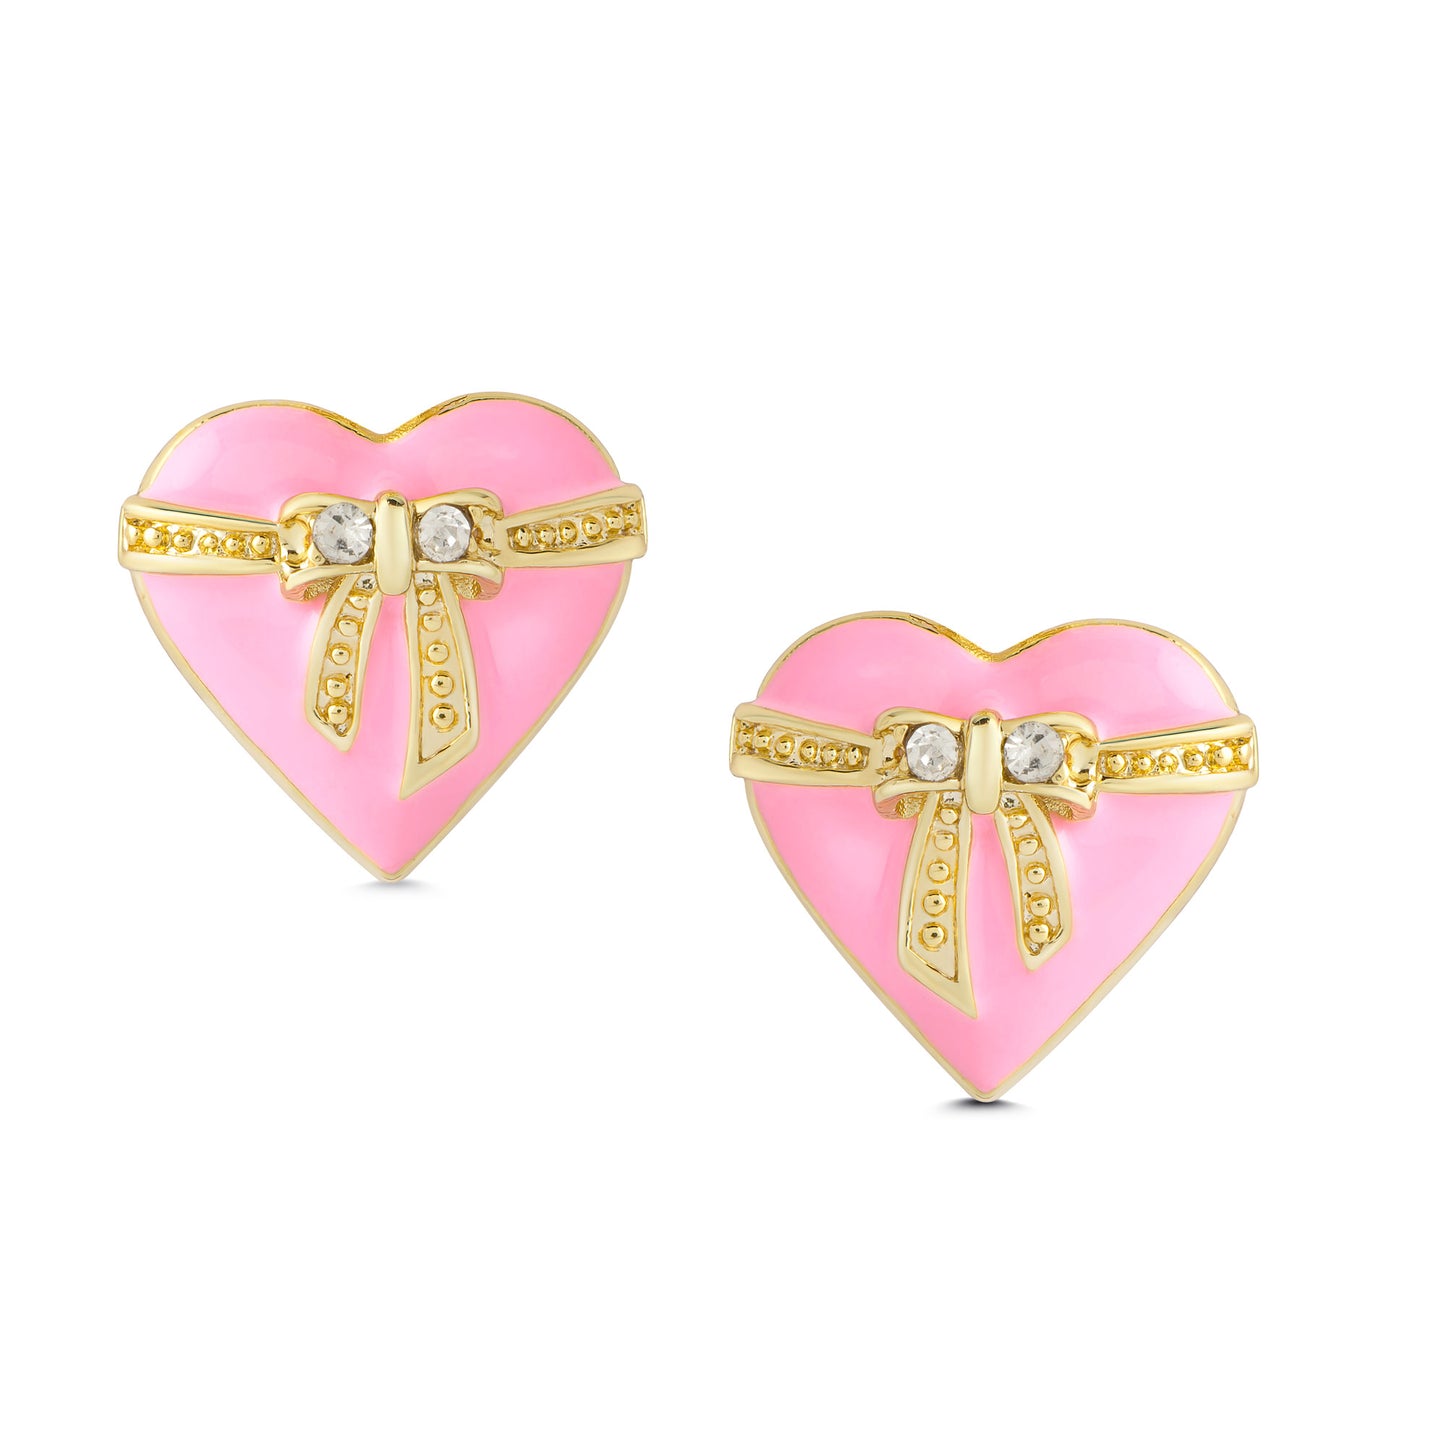 Lily Nily Heart &  Ribbon Bow Stud Earrings